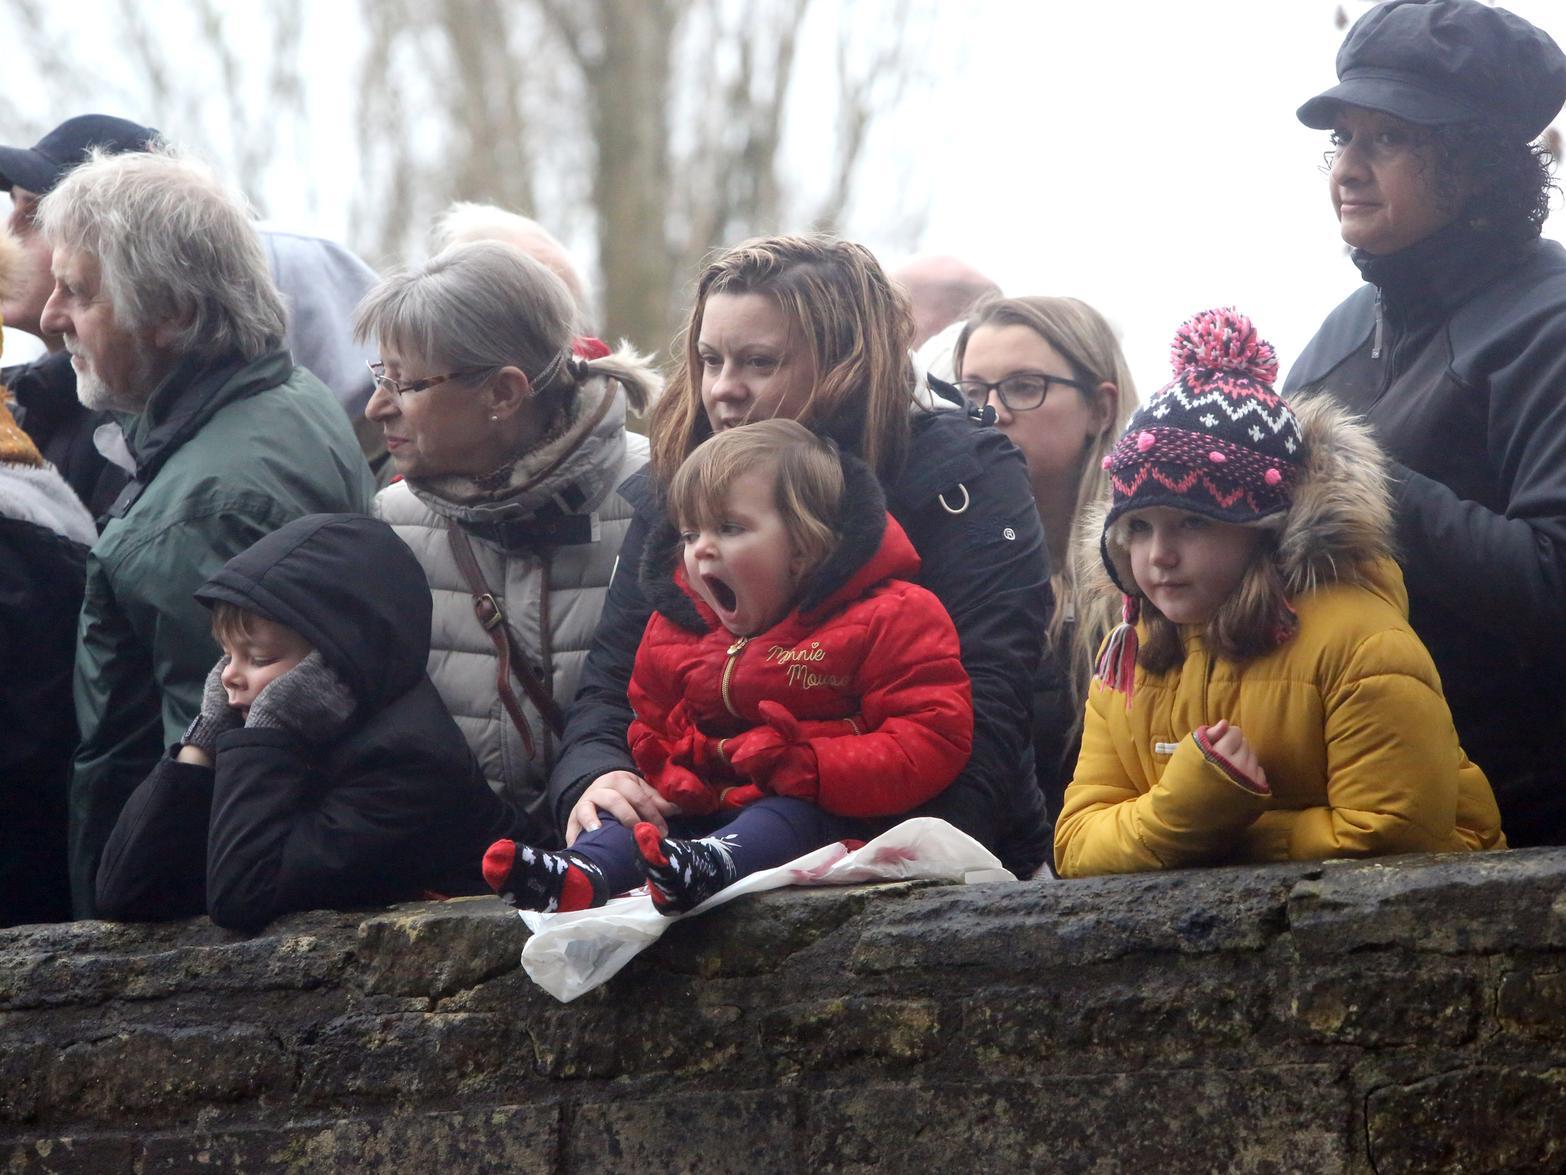 Lots of people made their way to Geddington Ford to watch the squirt